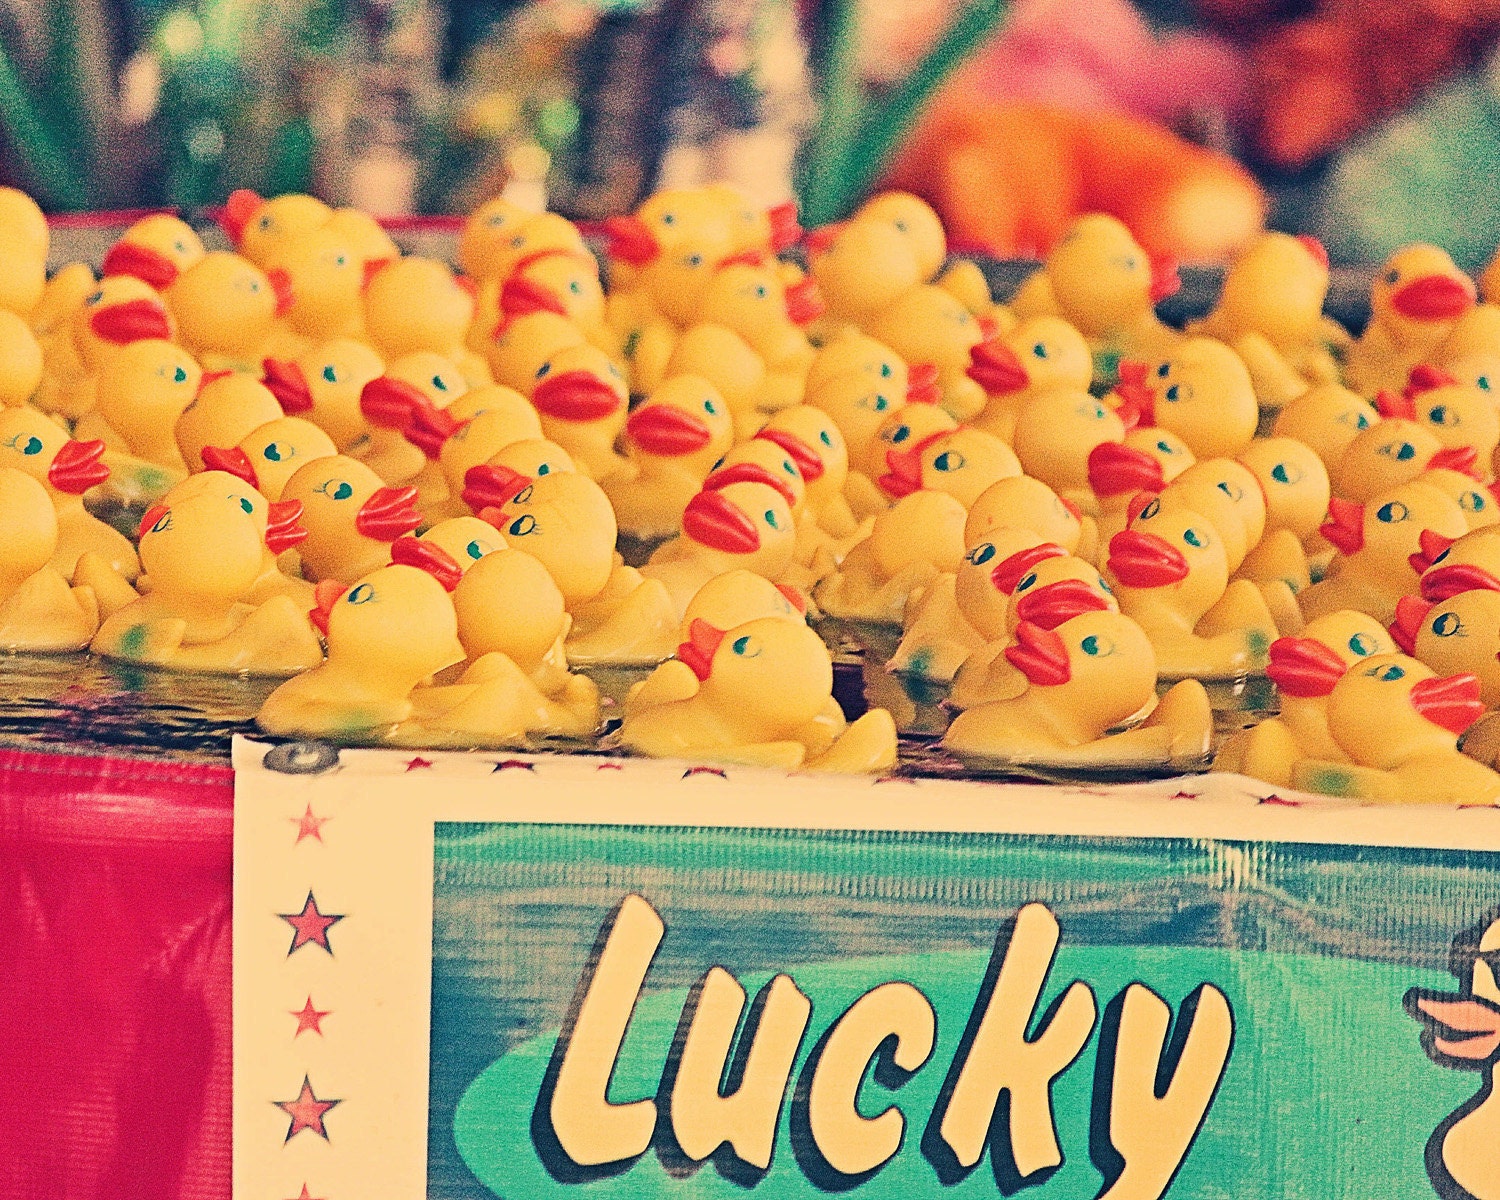 Lucky You - 5x7 photograph - fine art print - rubber ducks - carnival art - vintage photography - maybesparrowsplace